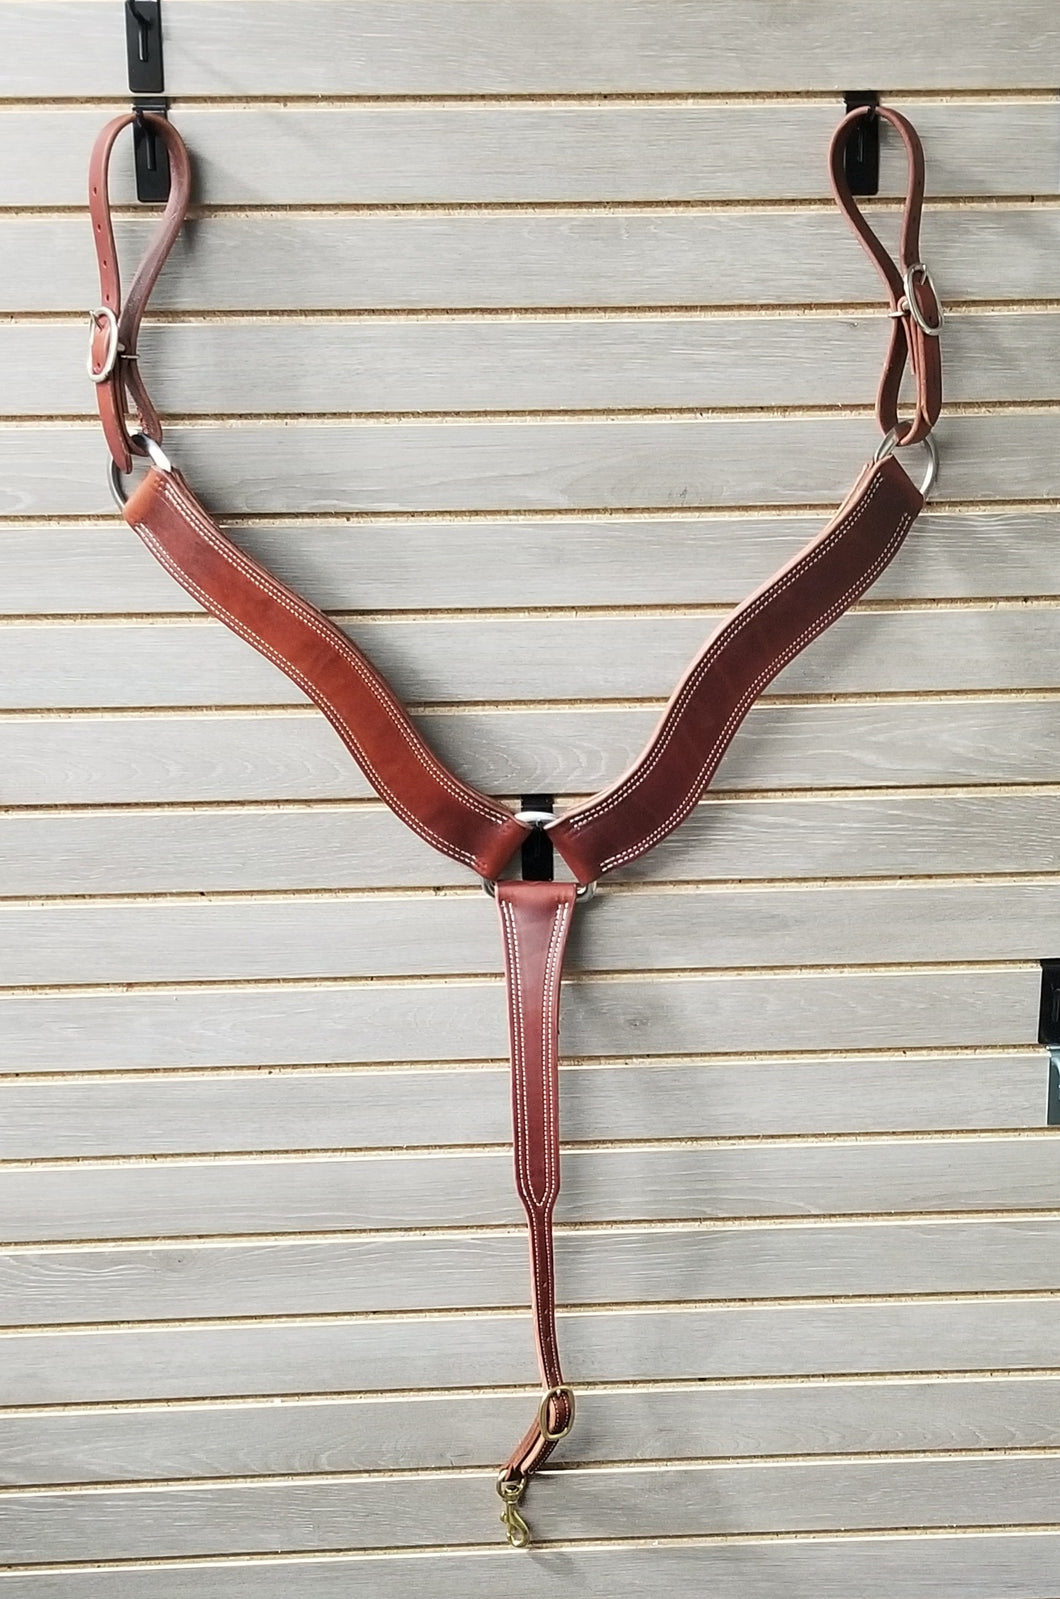 Cowperson Tack Large 3 piece Steer Ropers Breastcollar